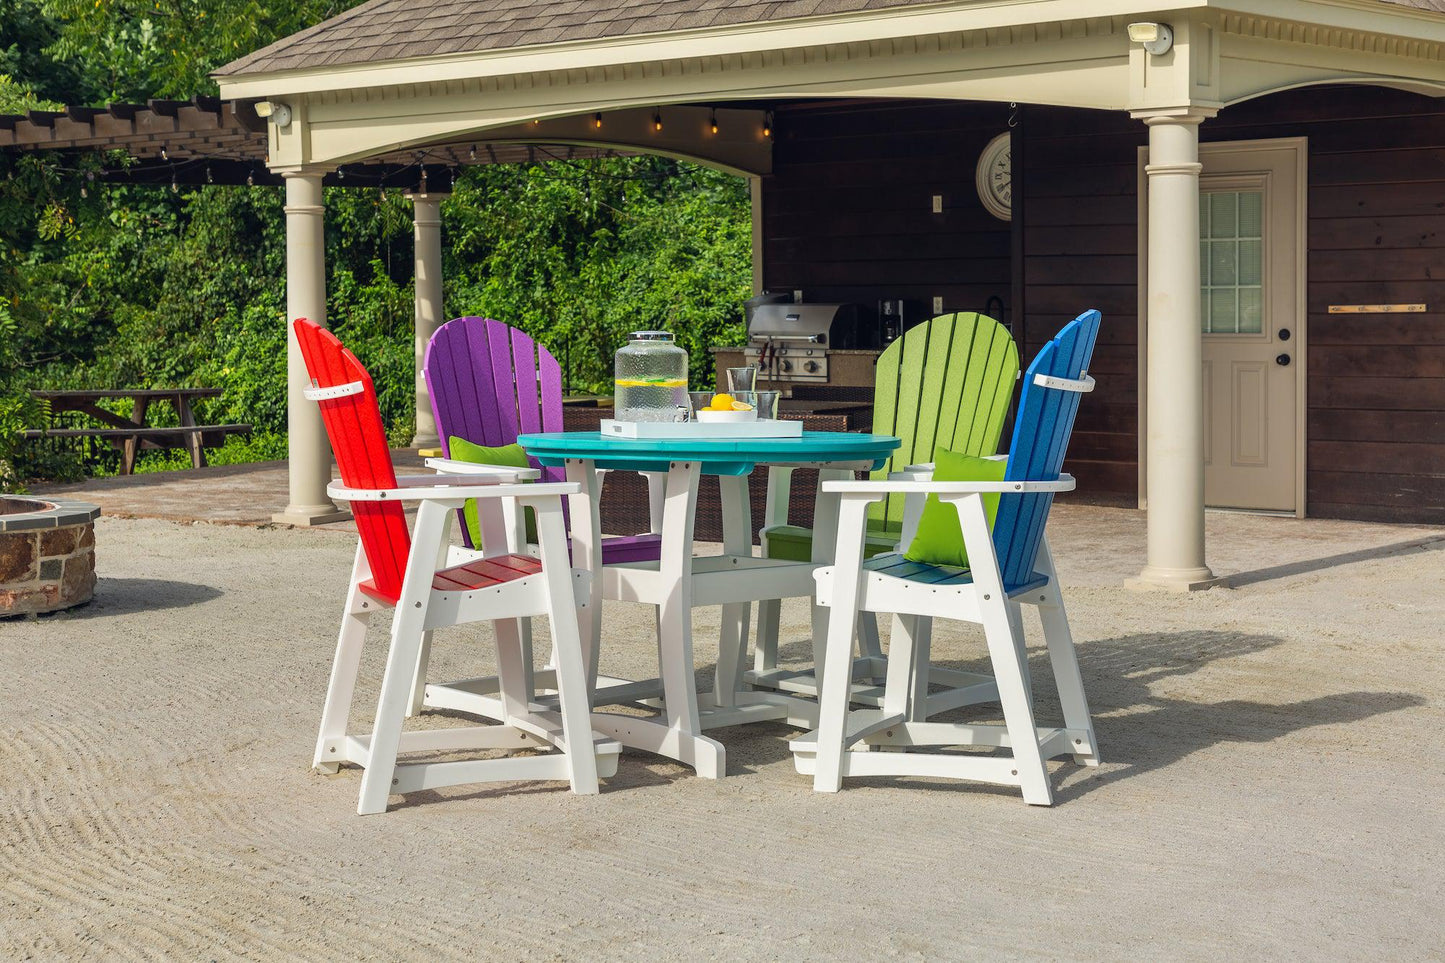 Patiova Recycled Plastic Amish Crafted Adirondack Bar Chair - LEAD TIME TO SHIP 3 WEEKS